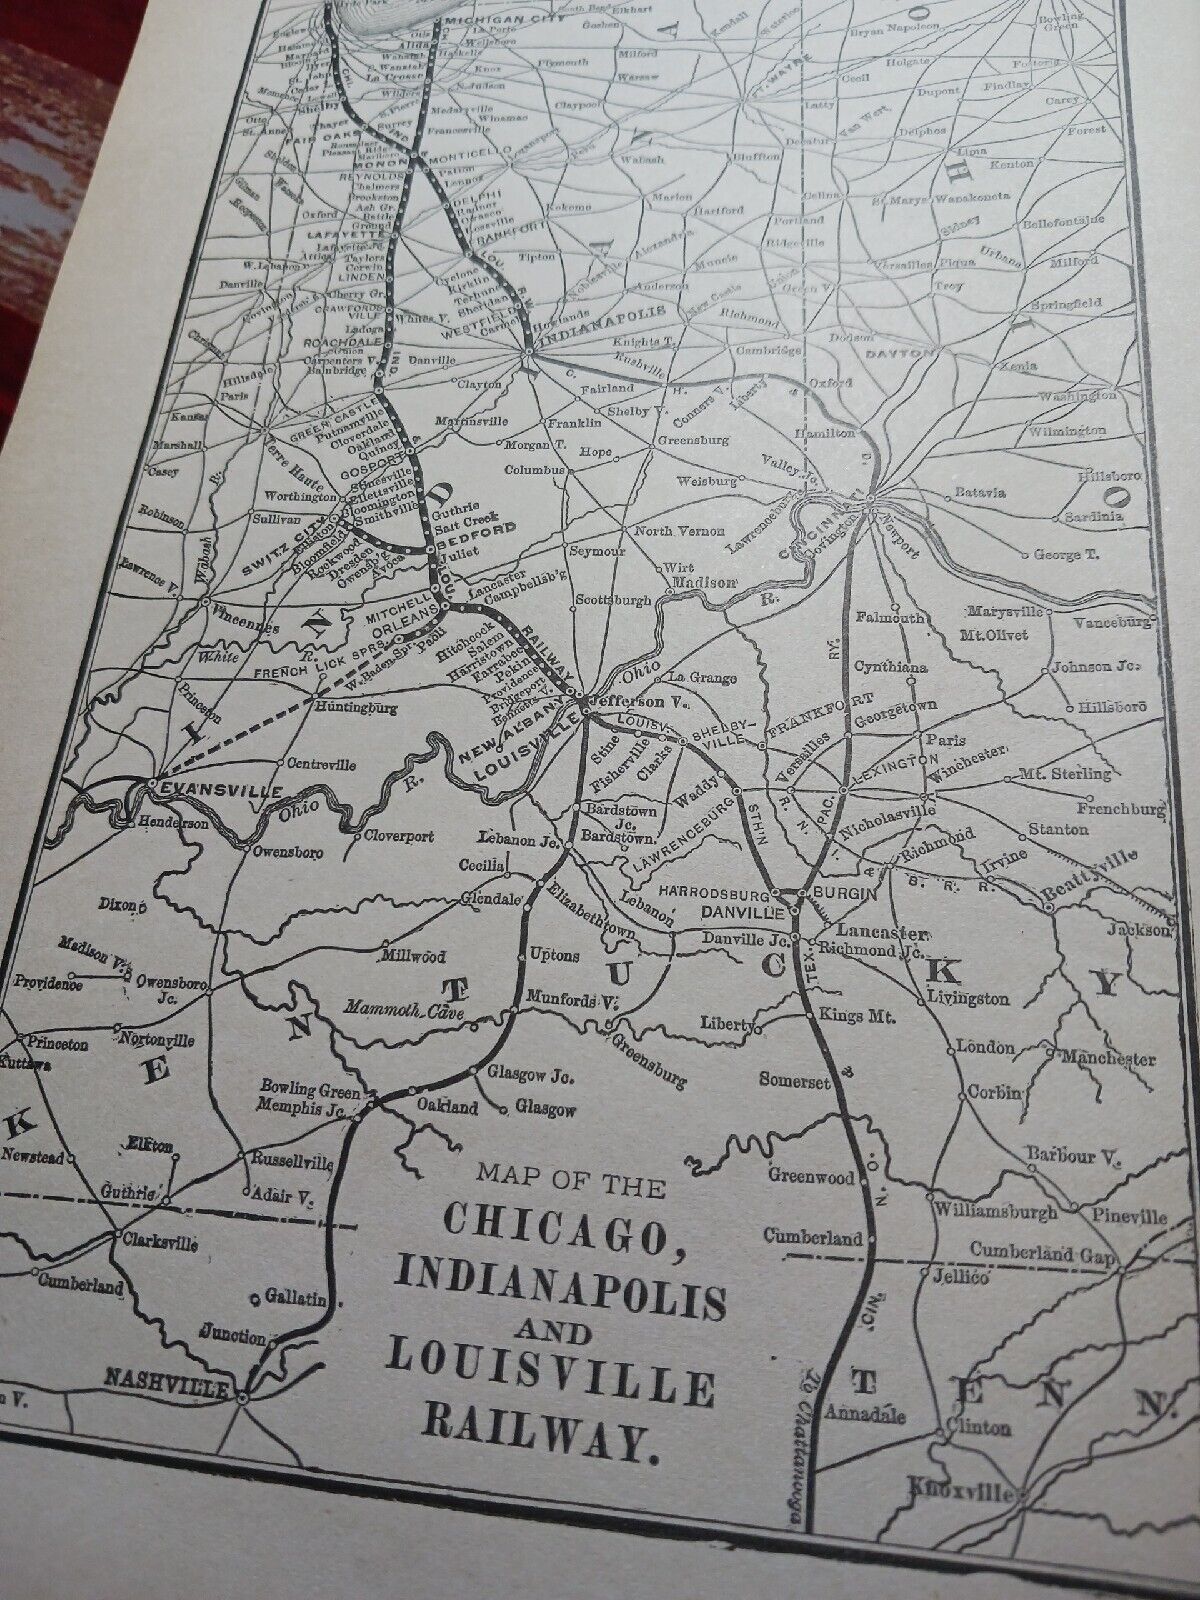 ☆1898 Railroad Map CHICAGO INDIANAPOLIS & LOUISVILLE RAILWAY French Lick Springs